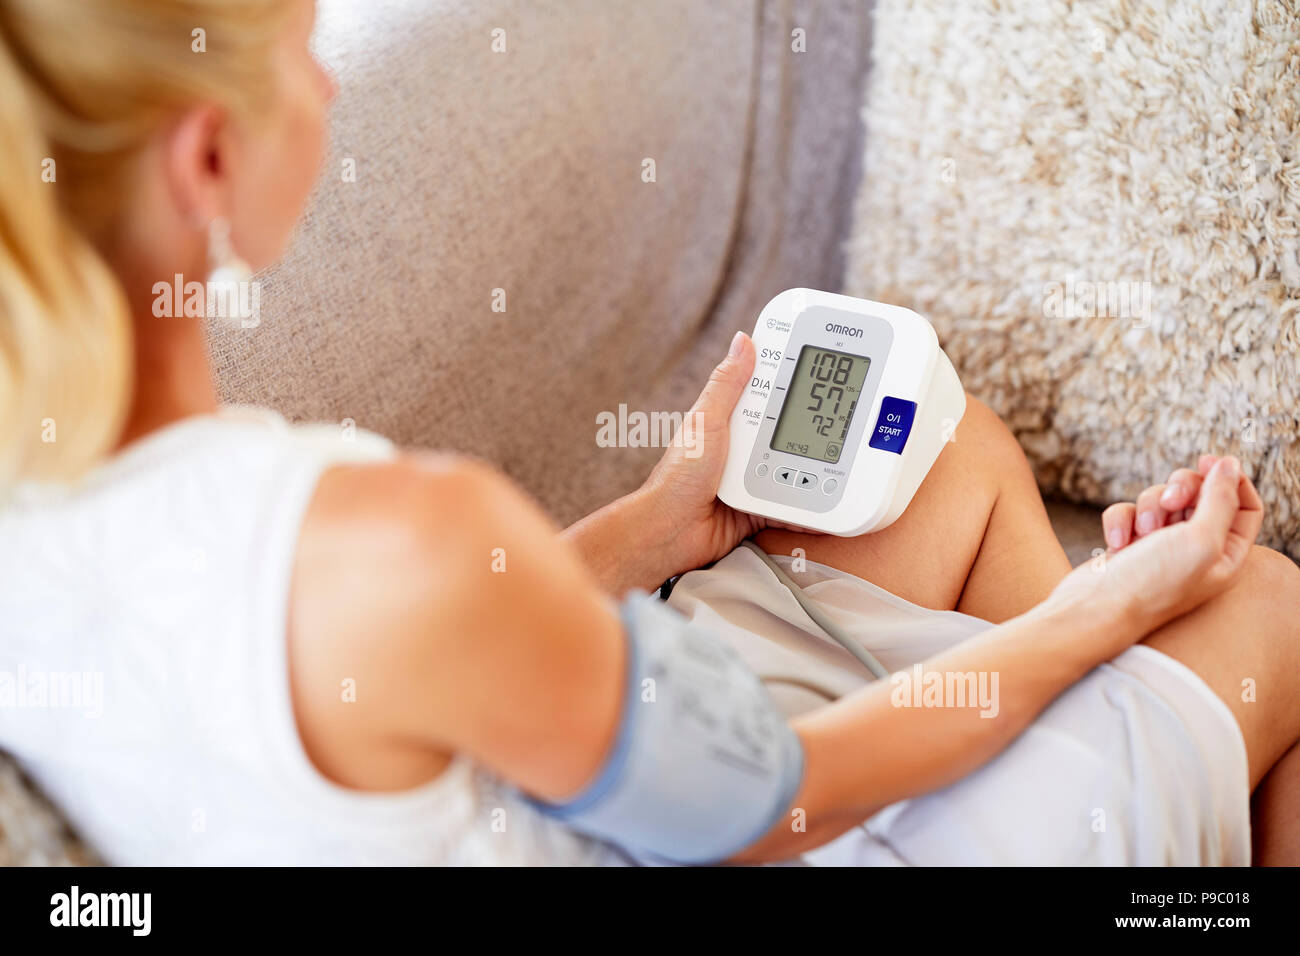 Woman checking her blood pressure Stock Photo